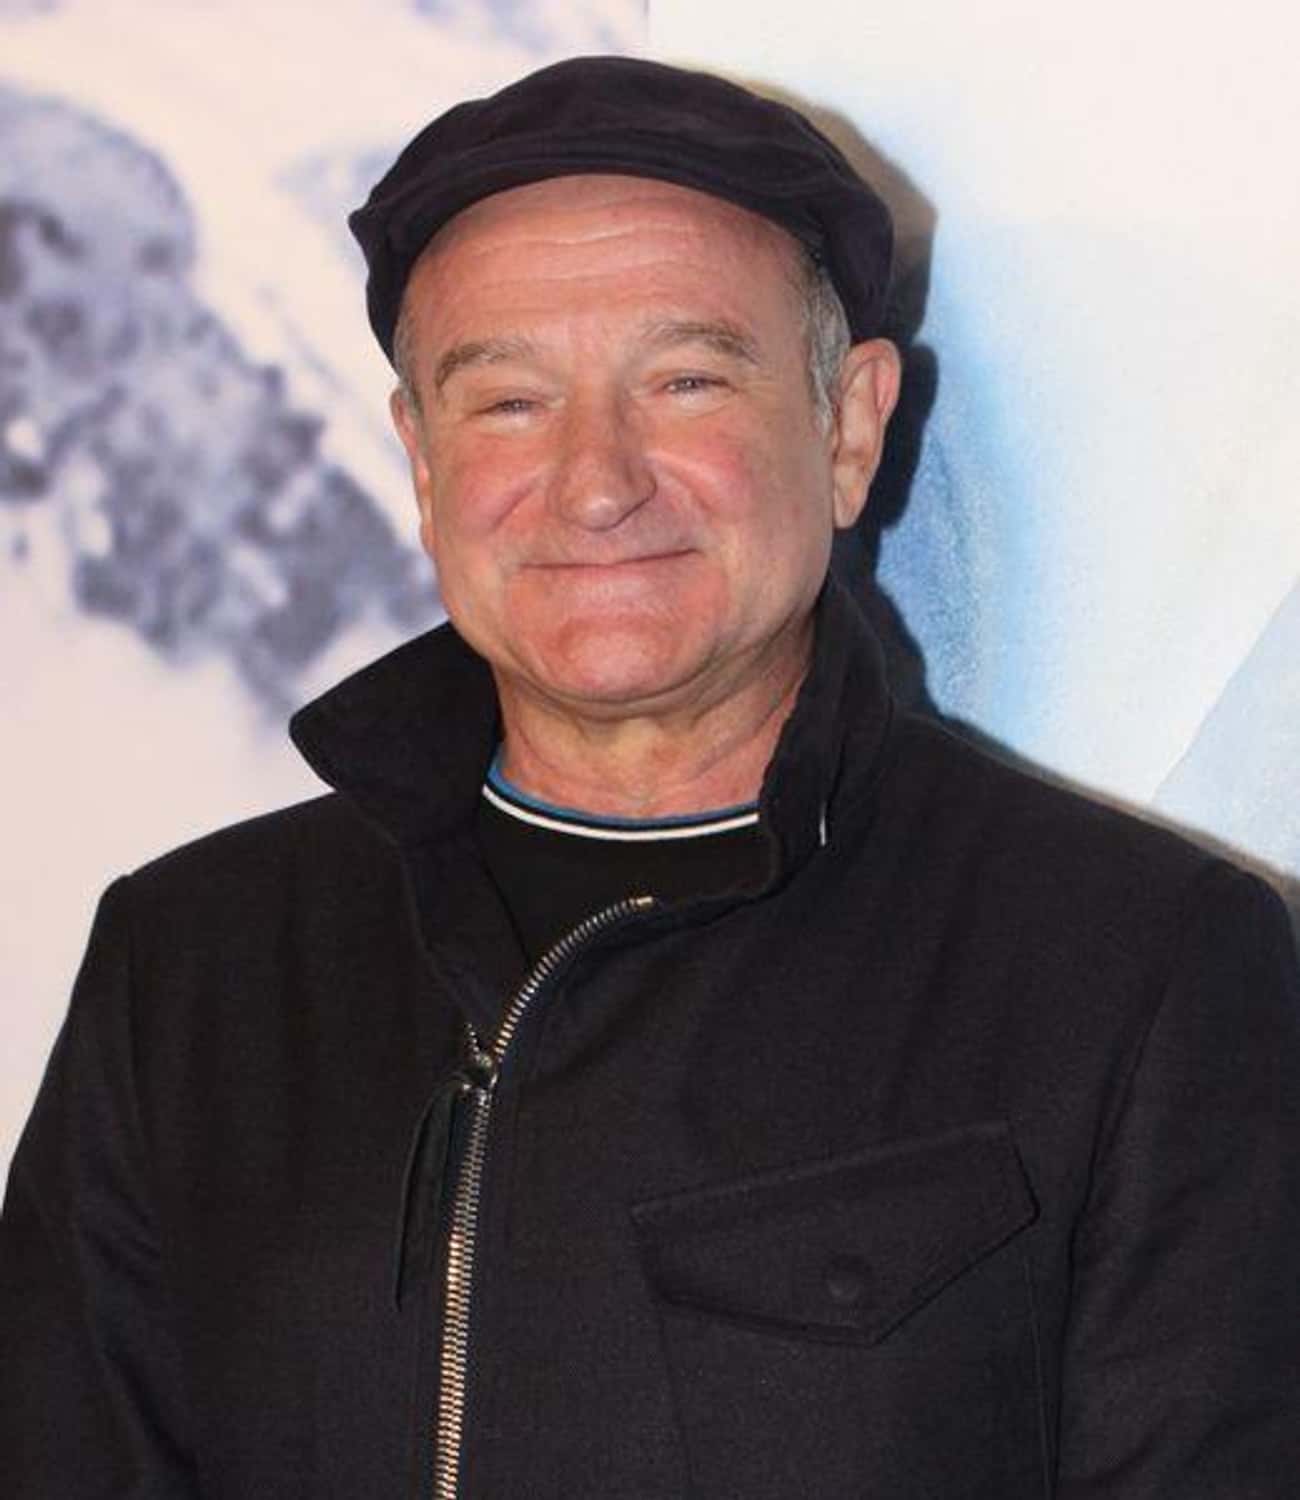 Robin Williams Visited Sick Hospitalized Children Every Christmas